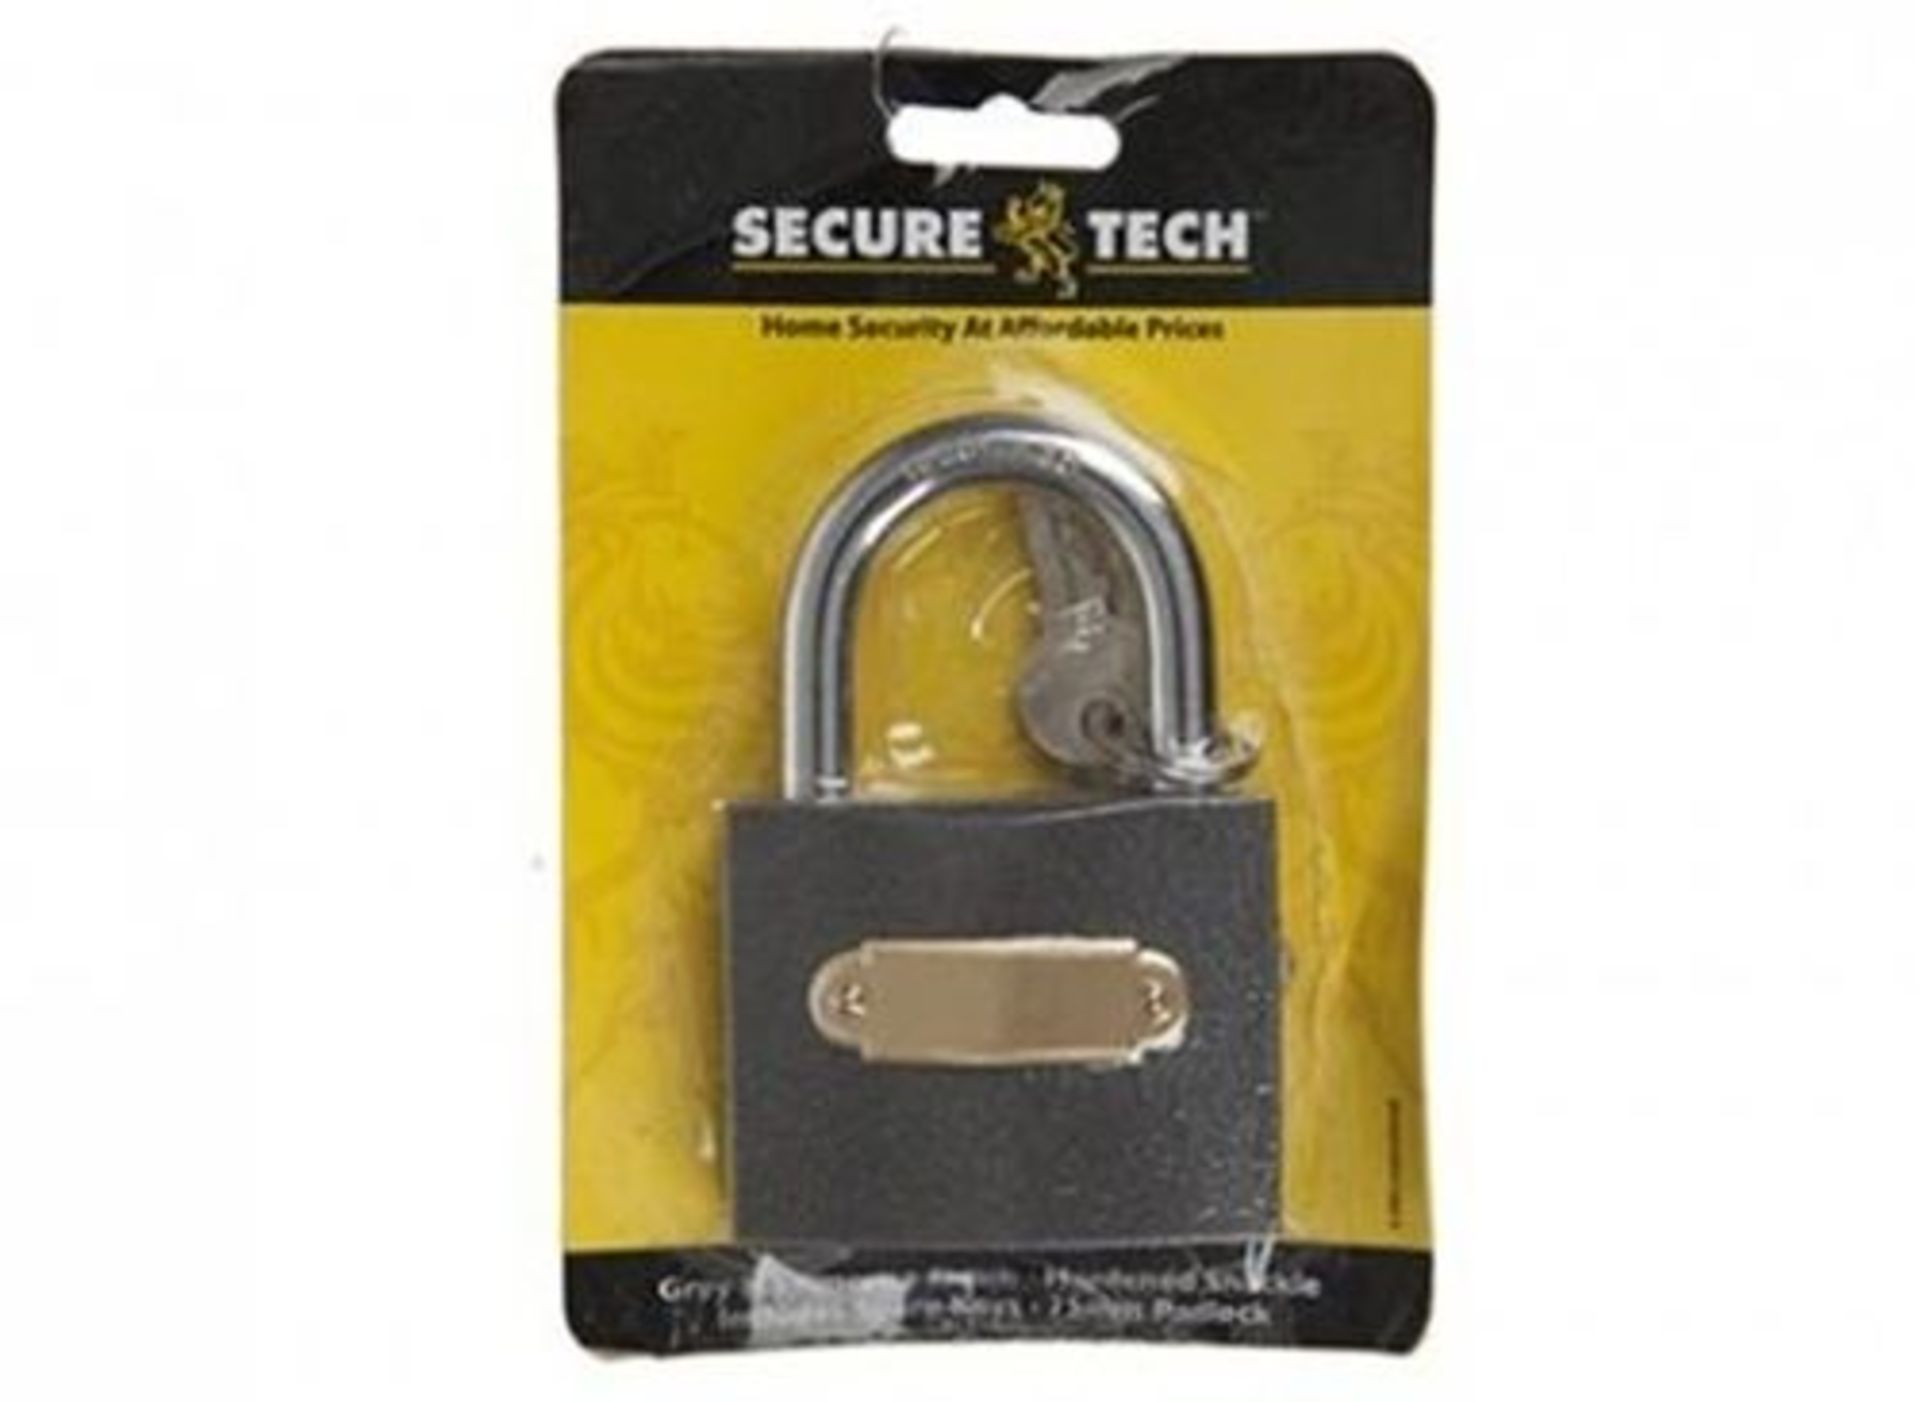 V Brand New Secure Tech Grey Hammerite Hardened Shackle 75mm Padlock-Includes Two Spare Keys